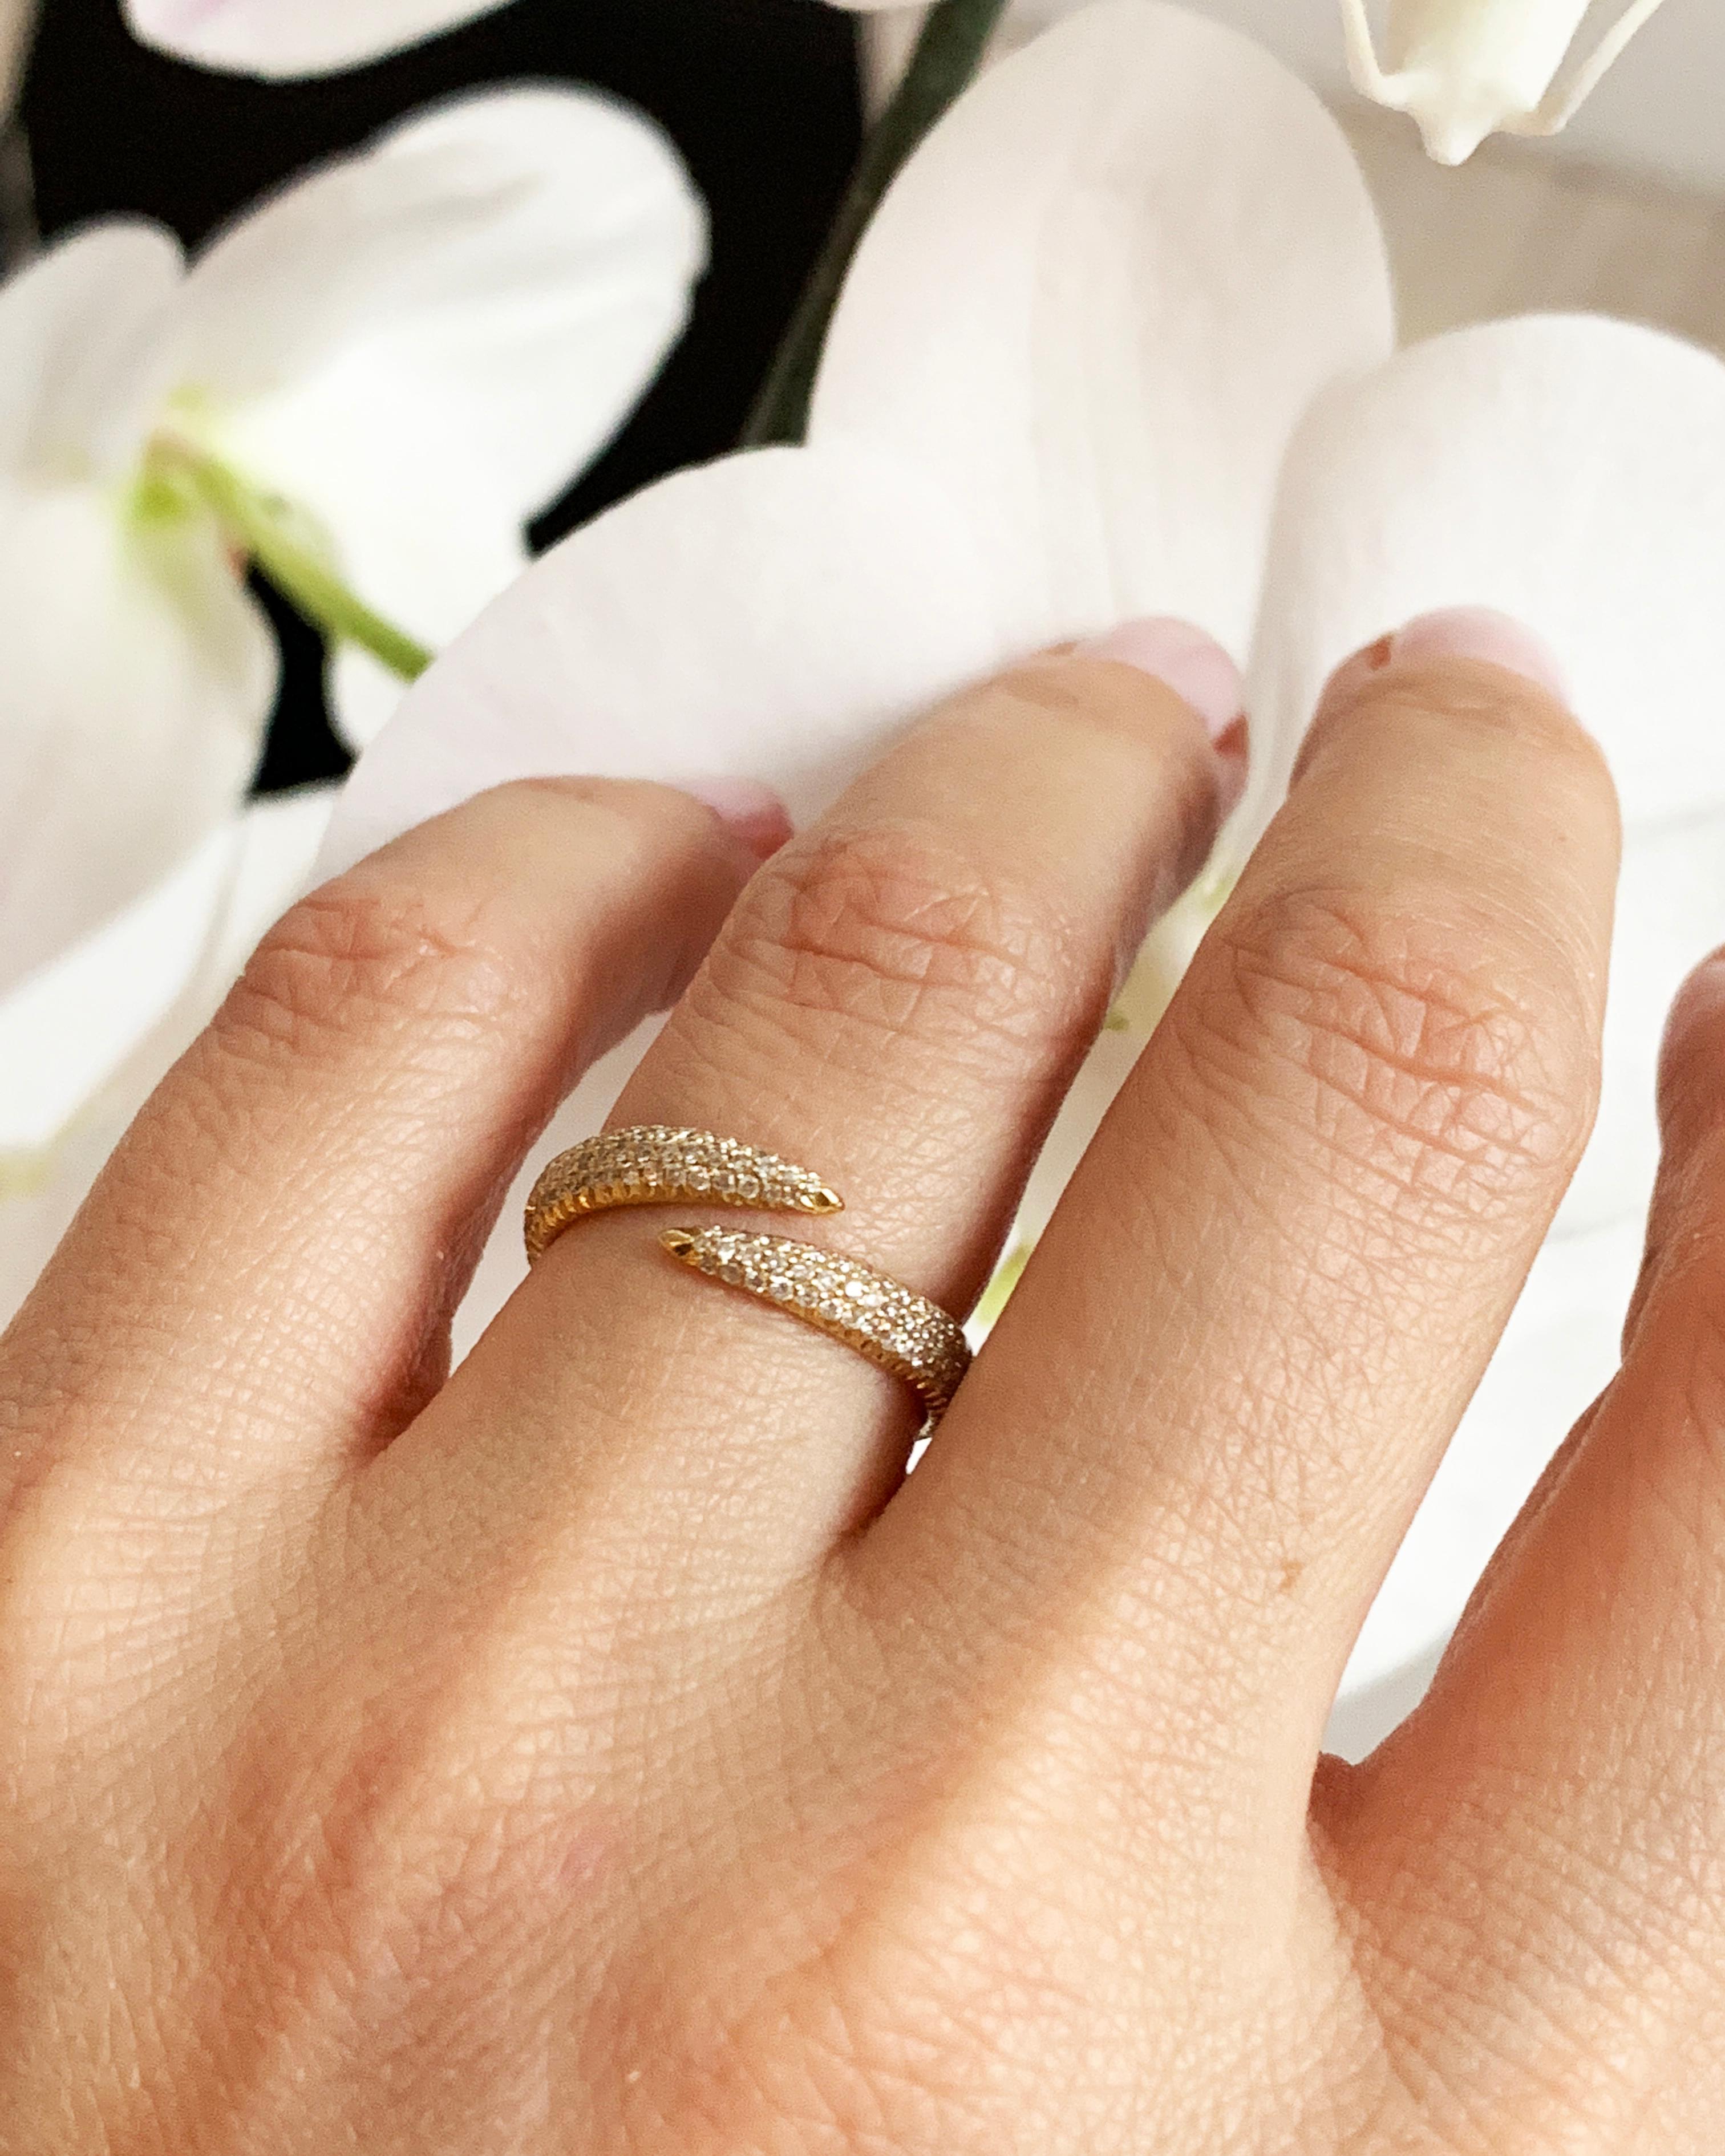 18K Yellow Gold with Pale Champagne Diamonds - Size 3.5.

Additional sizes are available and this ring can be made to order in any size. This ring can be worn on any finger and is most commonly worn as a pinky or midi-ring. This style also comes in